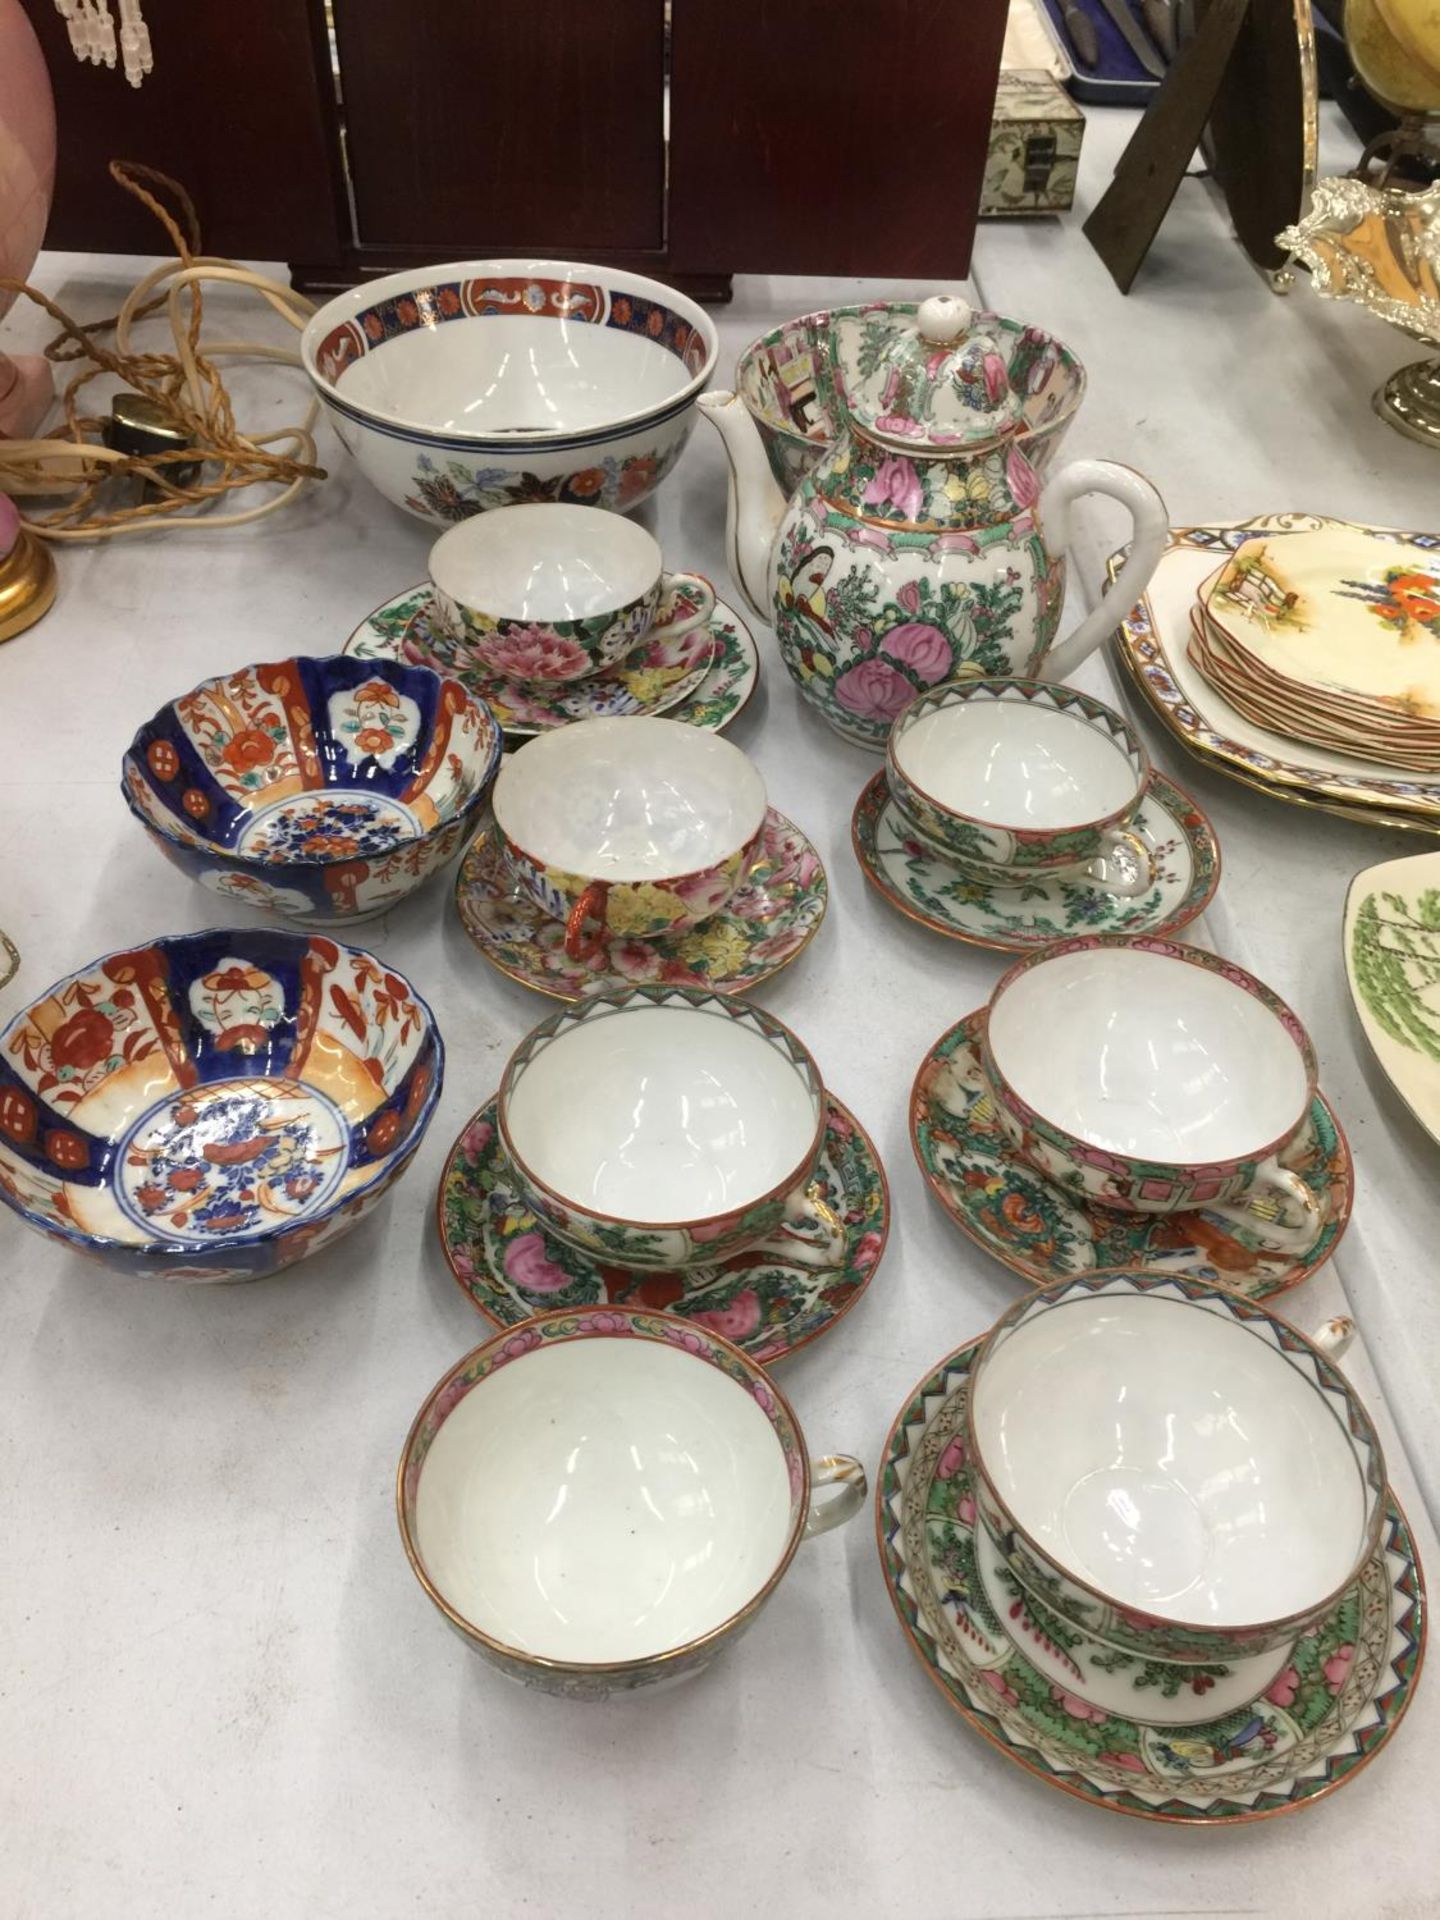 A QUANTITY OF ORIENTAL CHINA INCLUDING CUPS, SAUCERS, BOWLS, TEAPOT, ETC